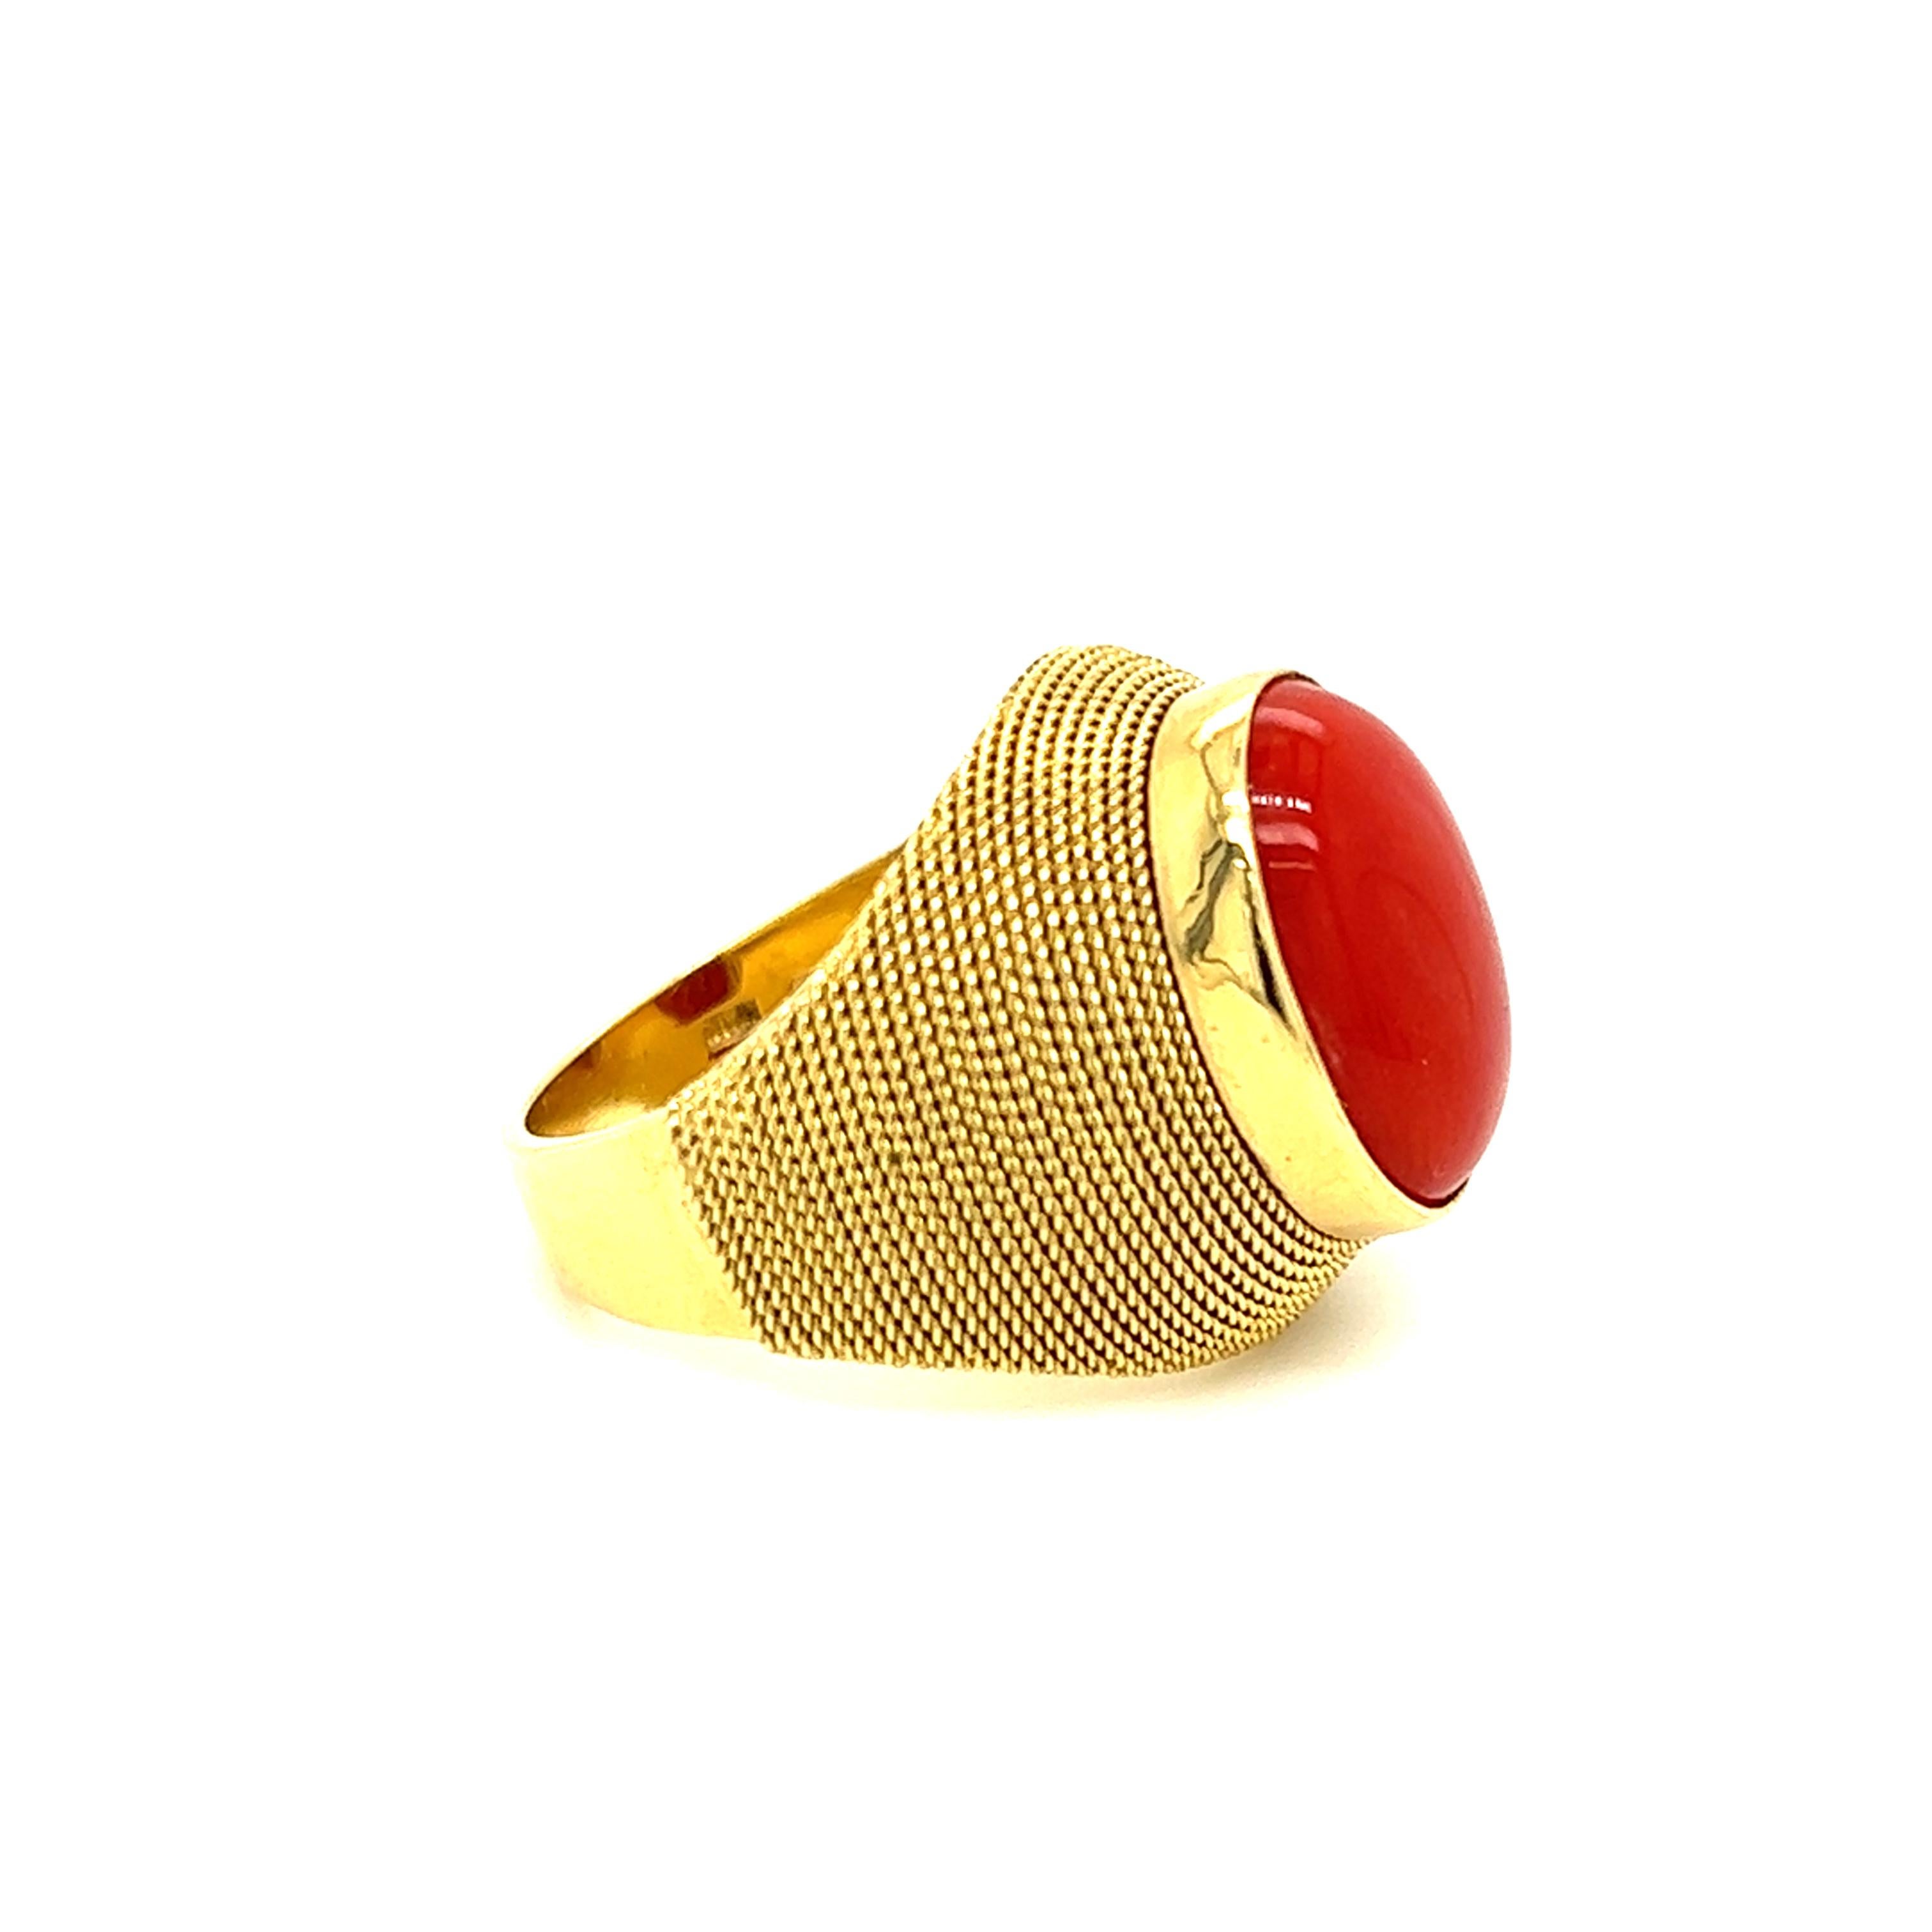 One 18-karat yellow gold rope ring, set with one 14x11mm oval cabochon coral stone.  The ring is a finger size 6.5 and weighs 9.5 grams in total weight.  The ring is resizable. Sizing is not included. 